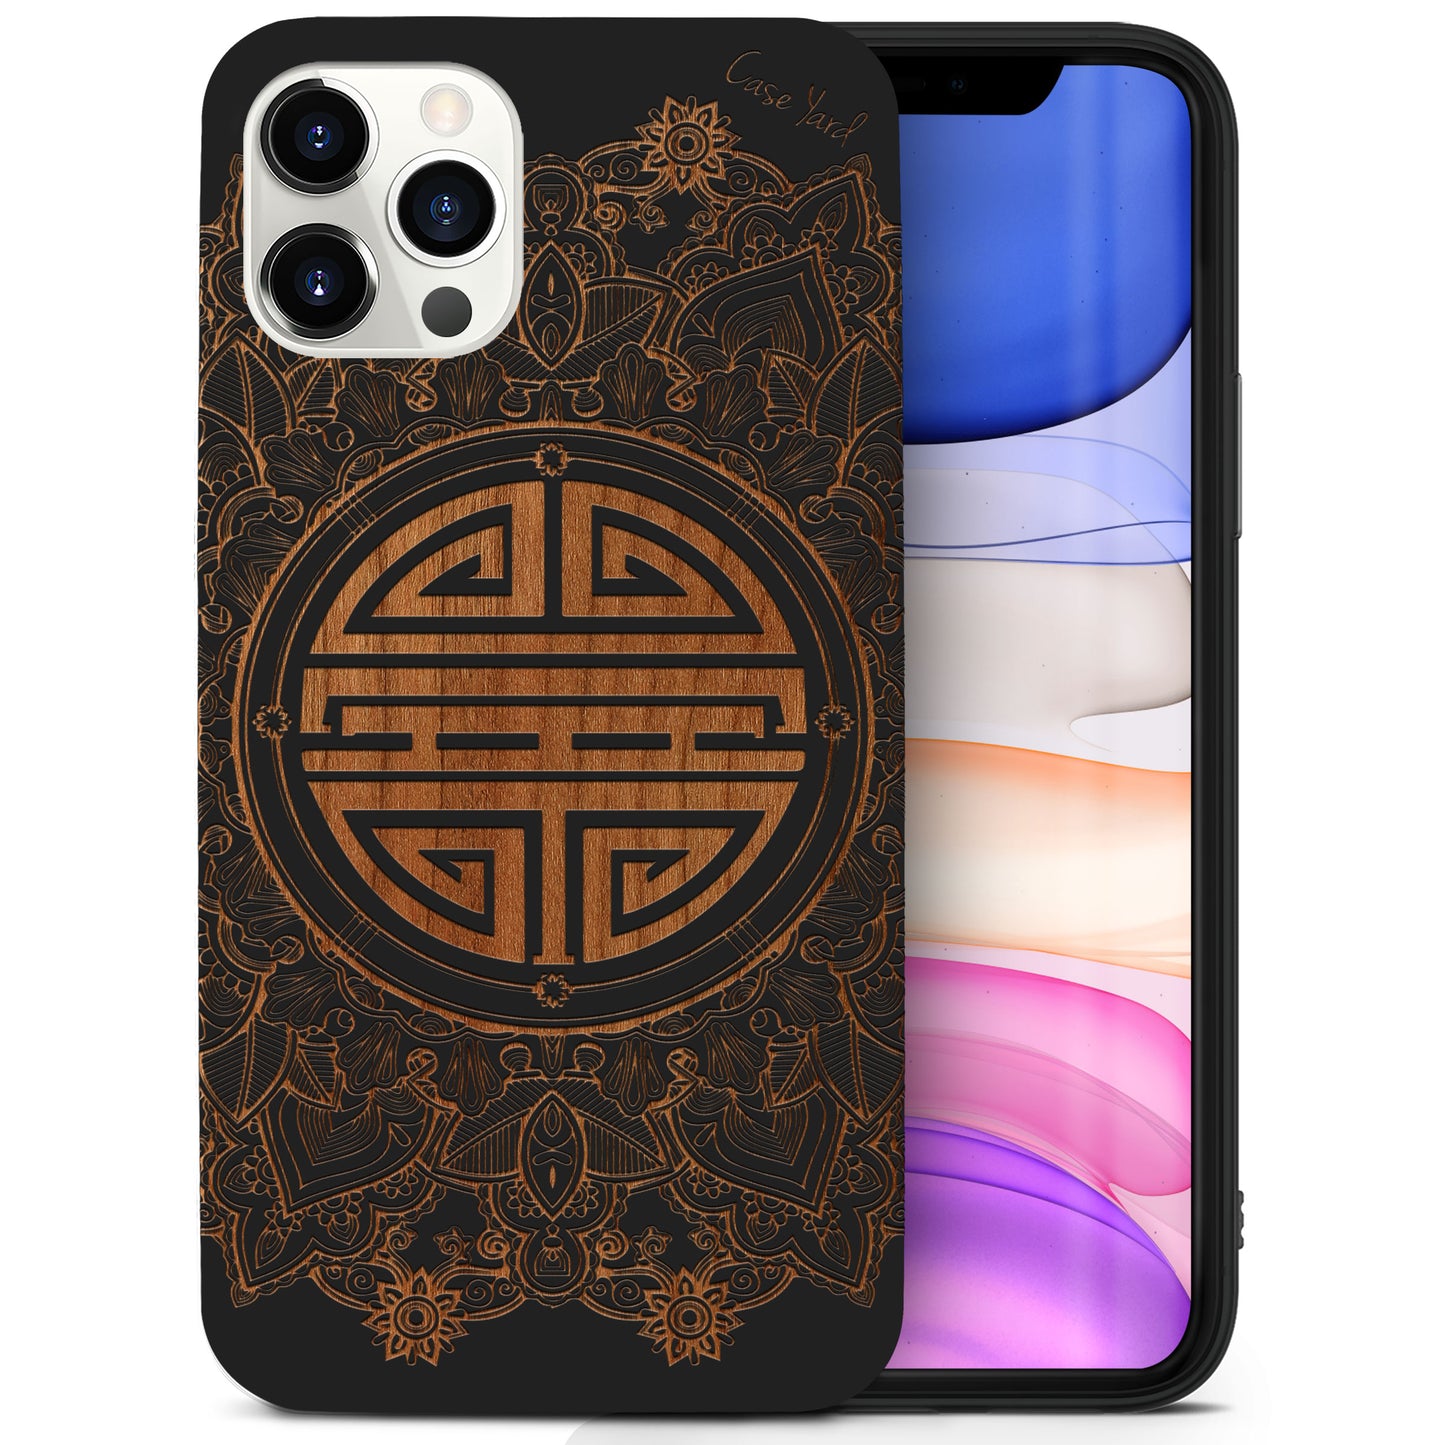 Wooden Cell Phone Case Cover, Laser Engraved case for iPhone & Samsung phone Chinese Mandala Design